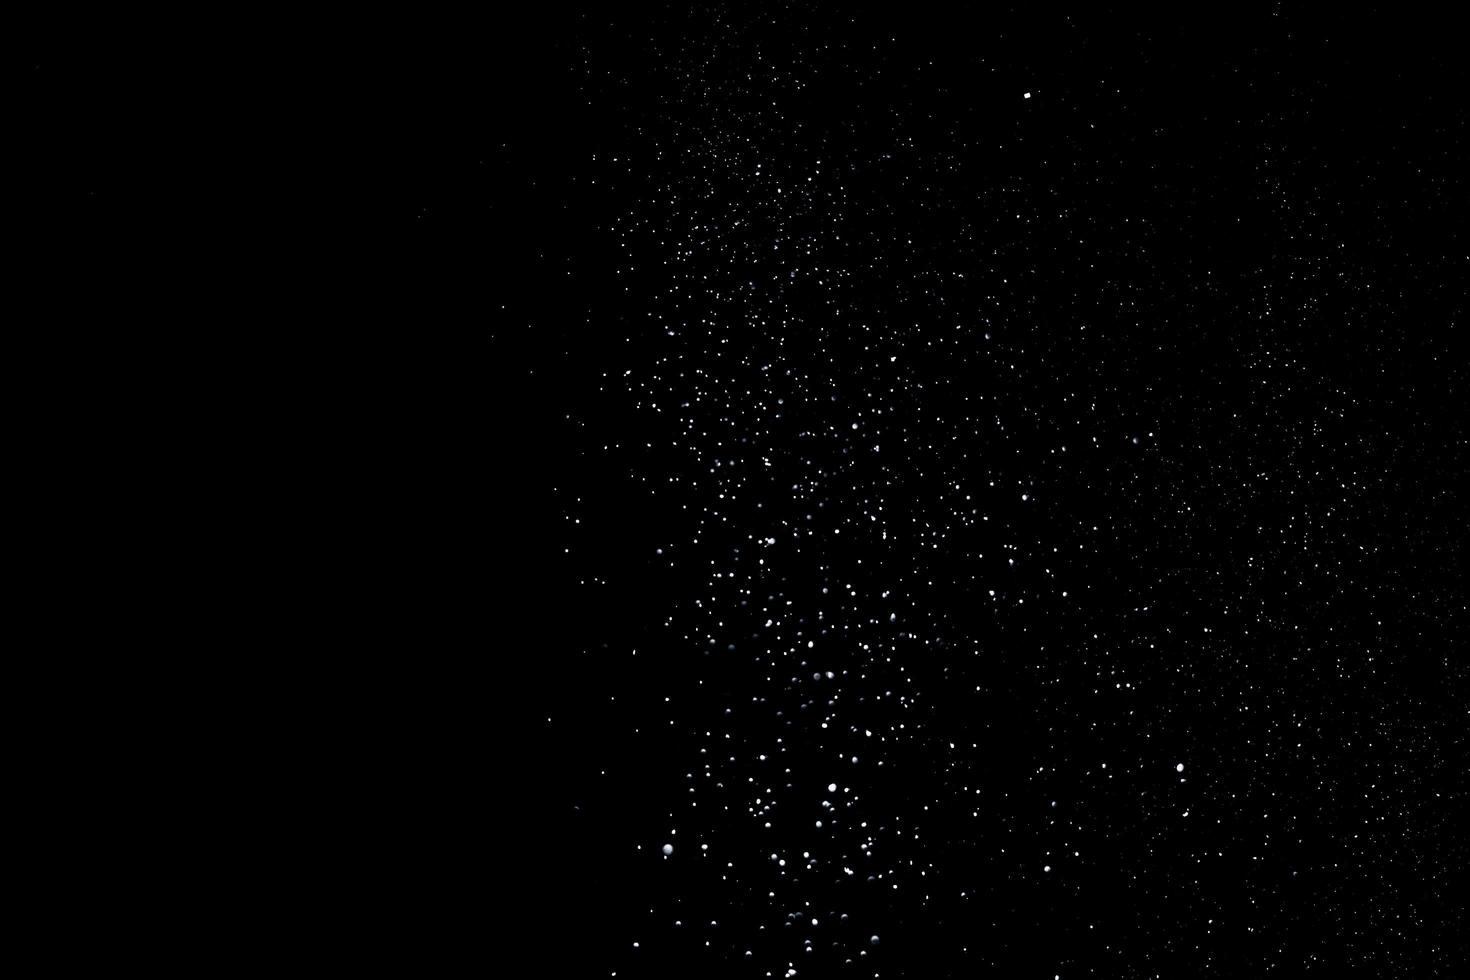 the white particles on black background representing a snowfall. Snow overlay footage for giving a freezing or winter effect to the video presentation. photo